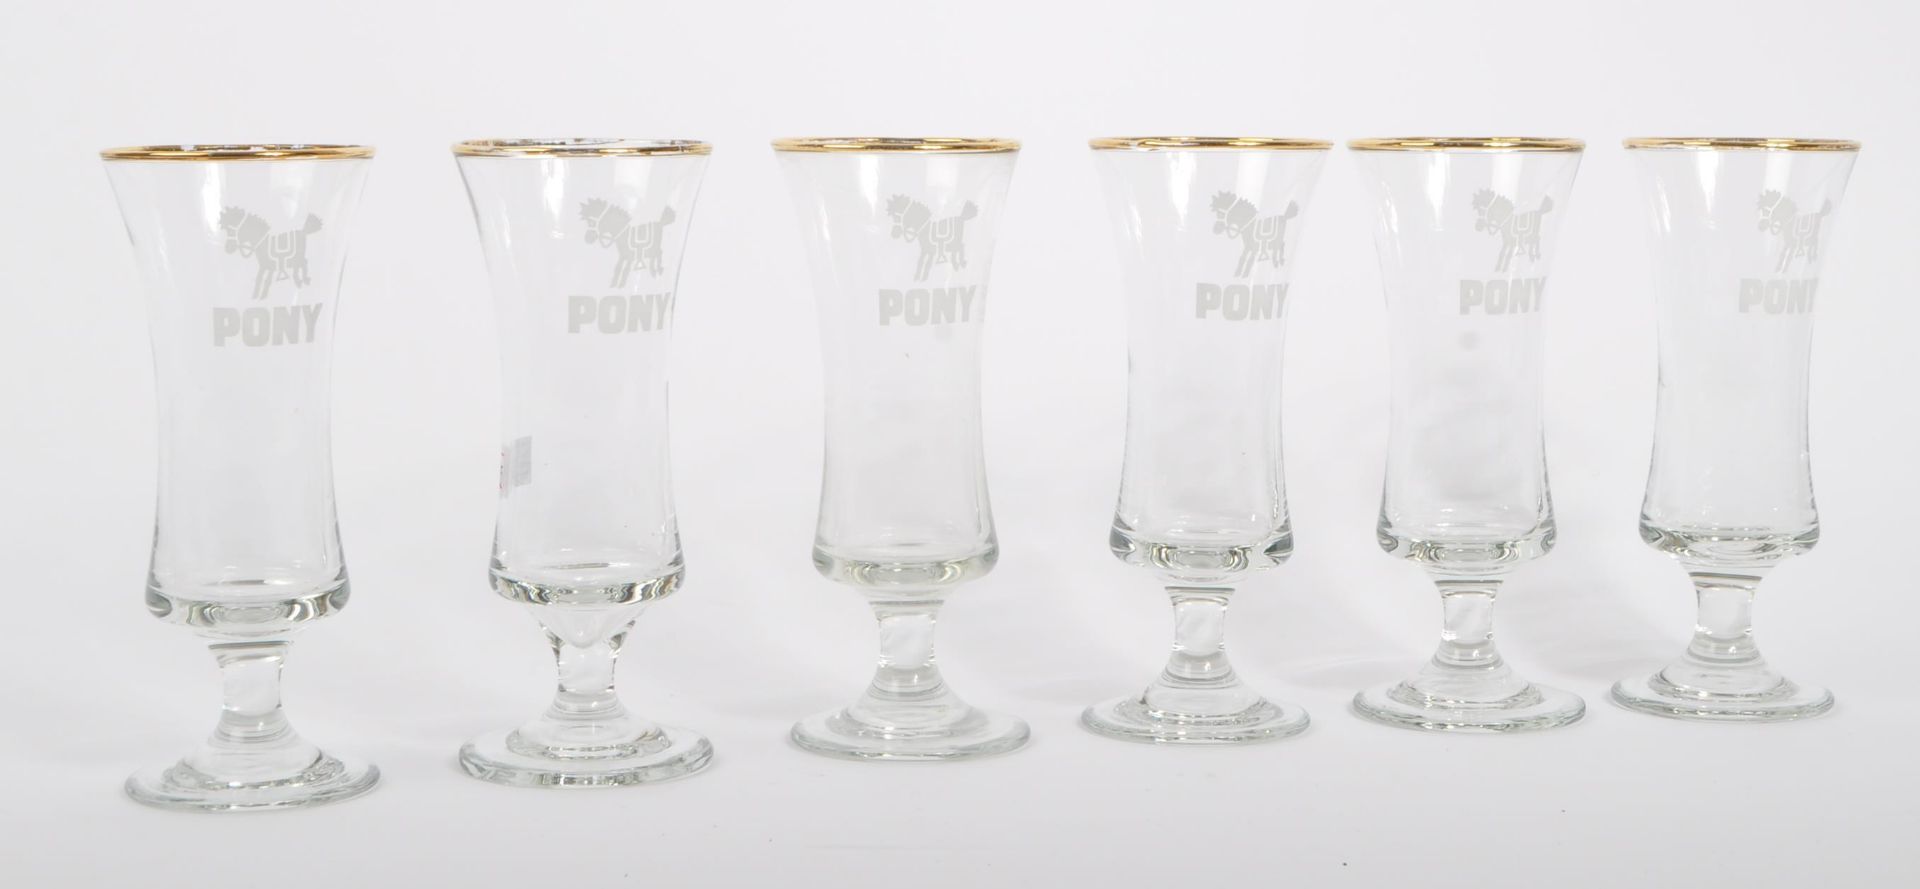 COLLECTION OF VINTAGE 20TH CENTURY PONY DRINKING GLASSES